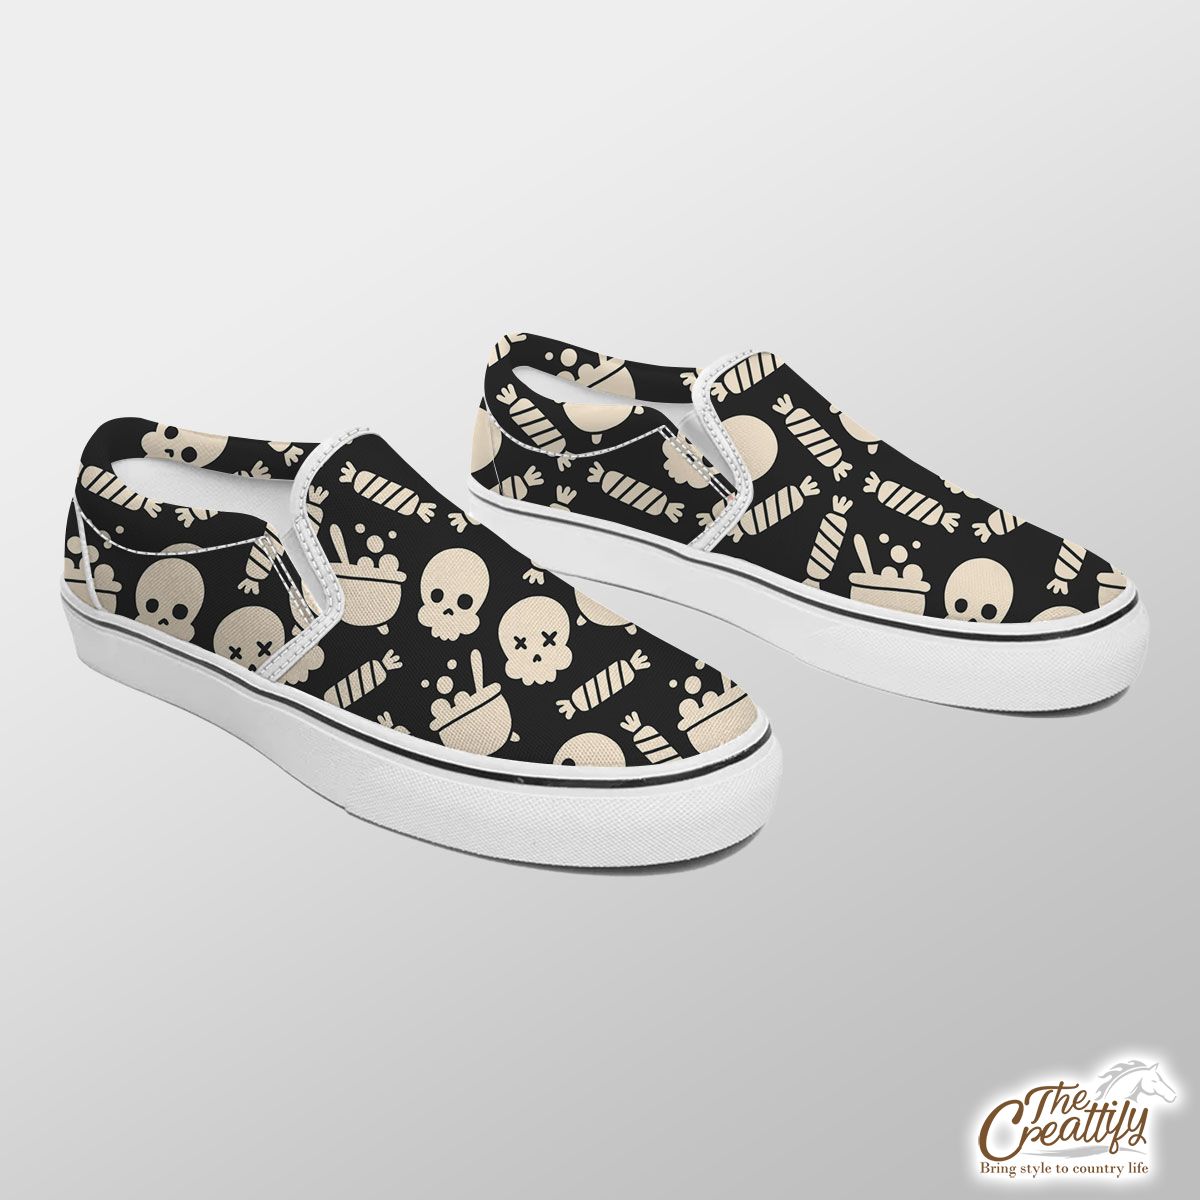 Black And White Skull Emoji With Halloween Candy Slip On Sneakers